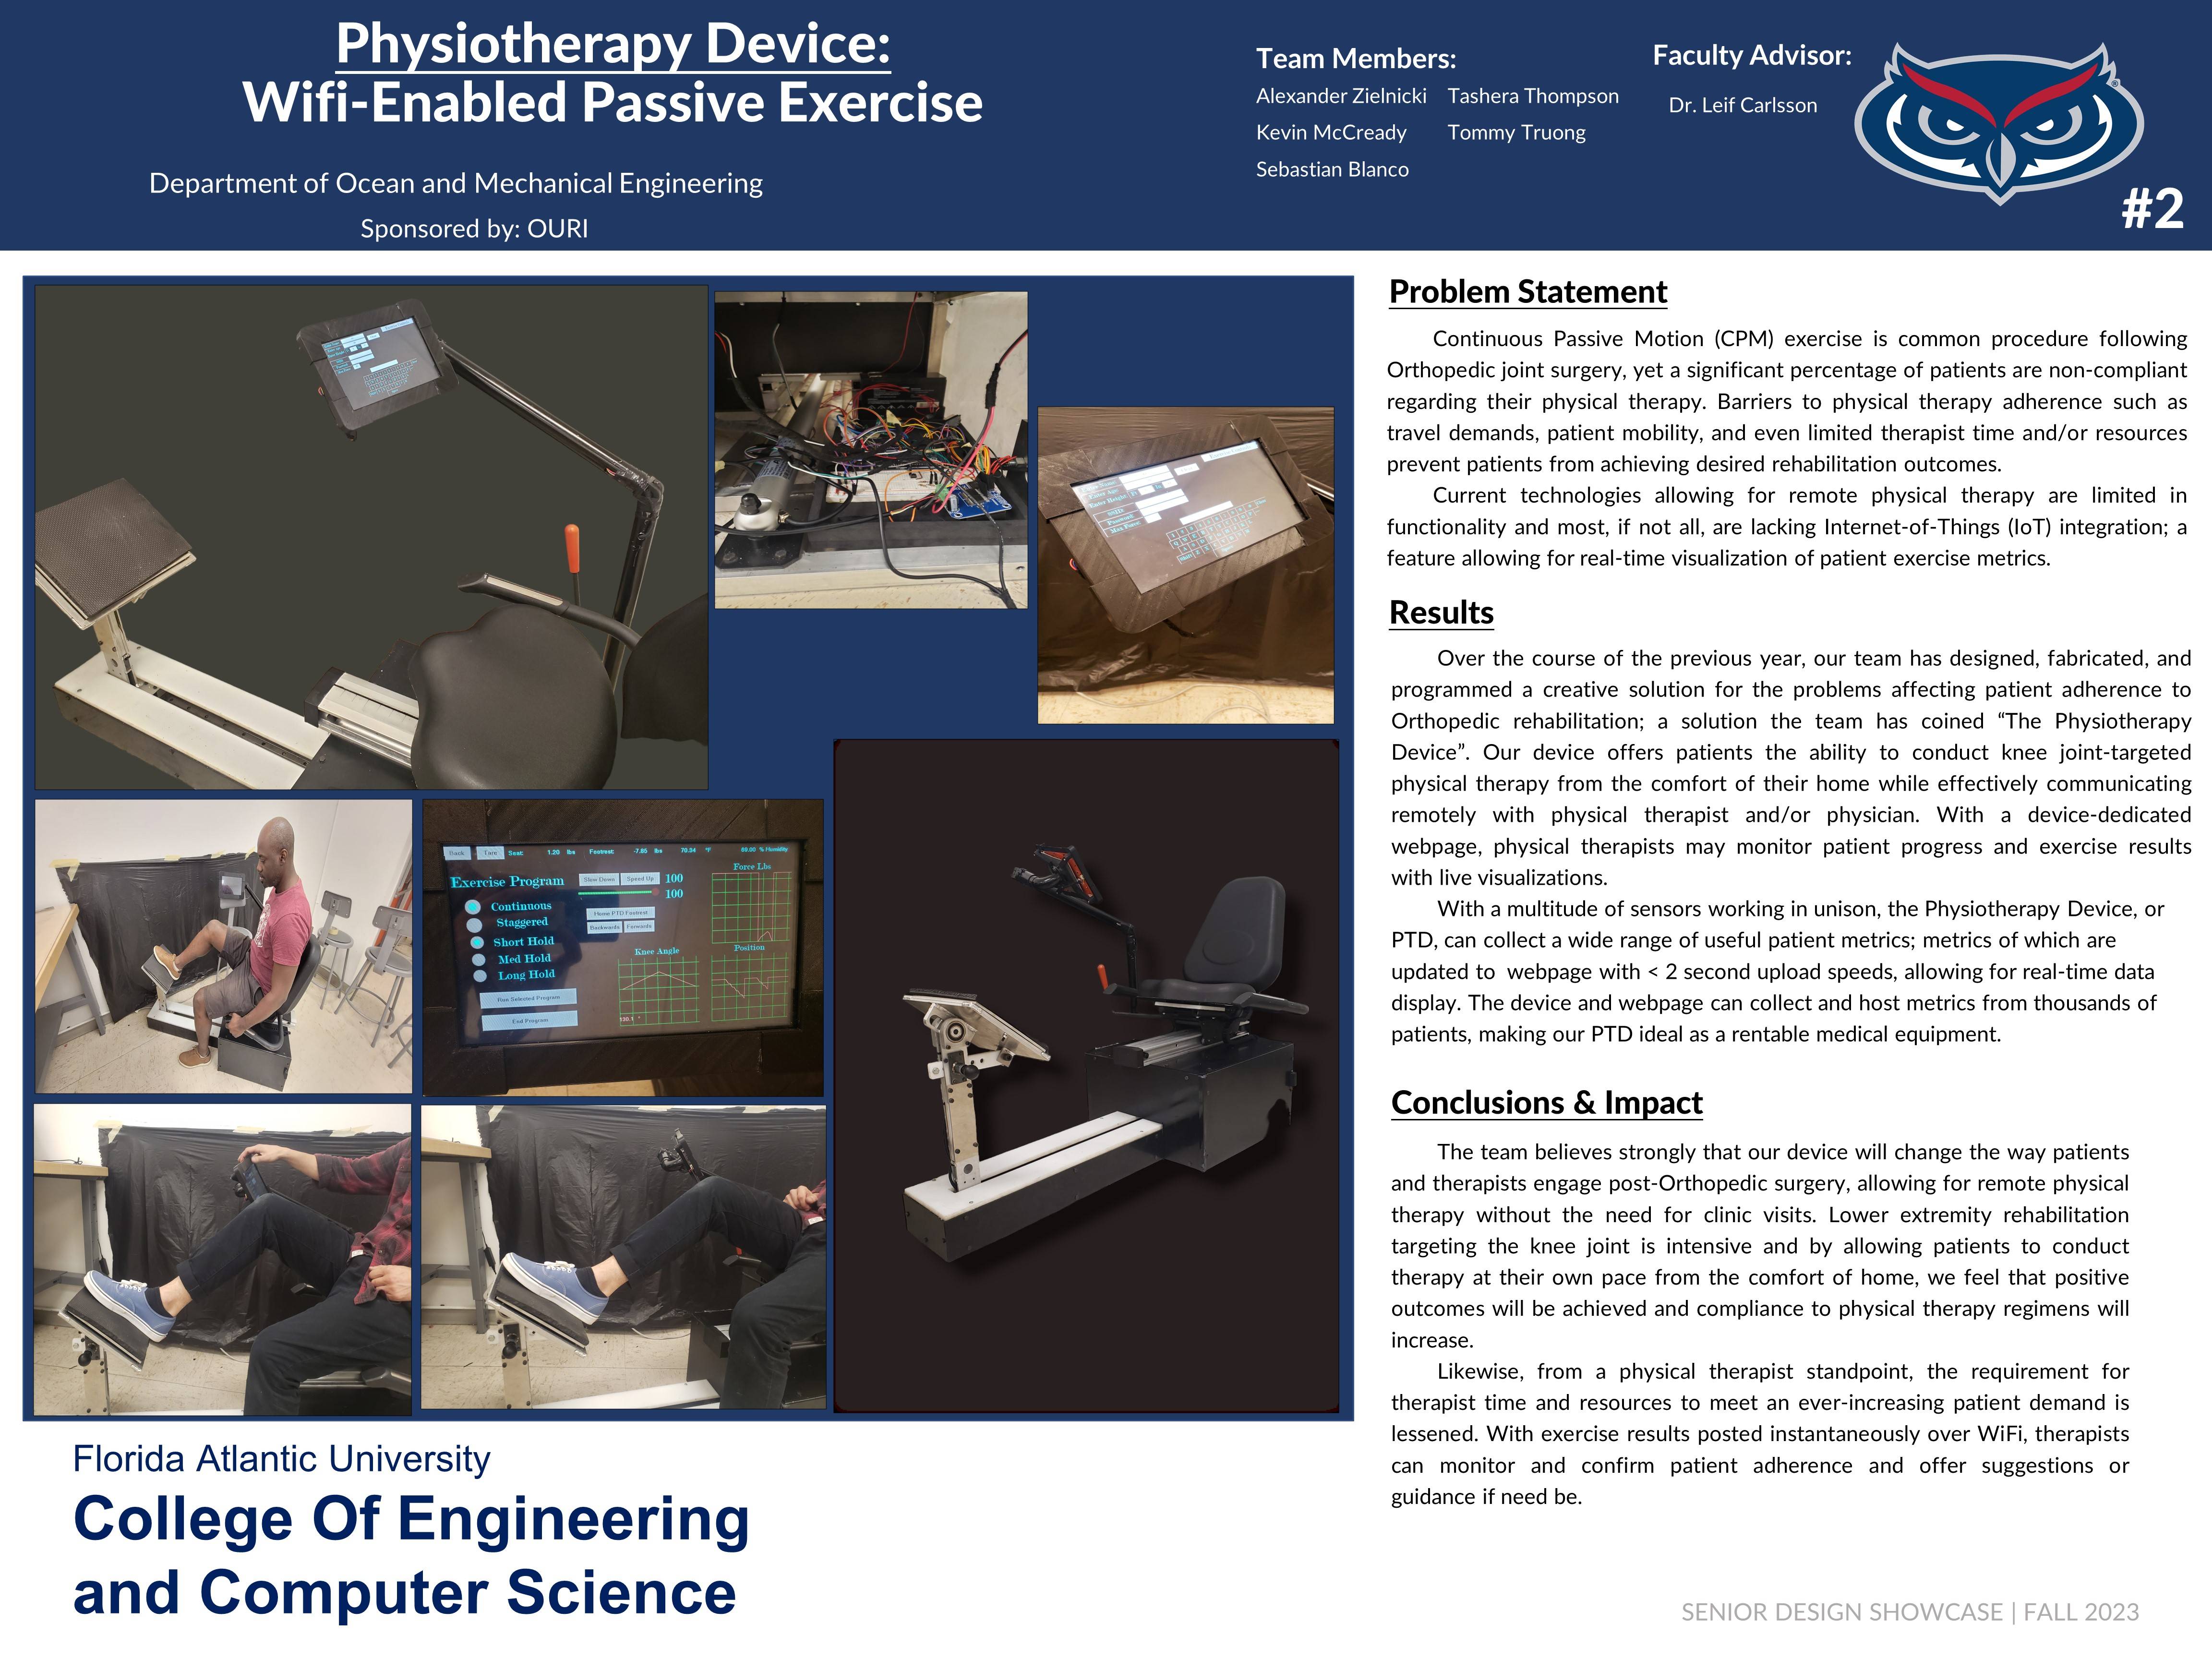 Physiotherapy Device: WiFi-Enabled Passive Exercise